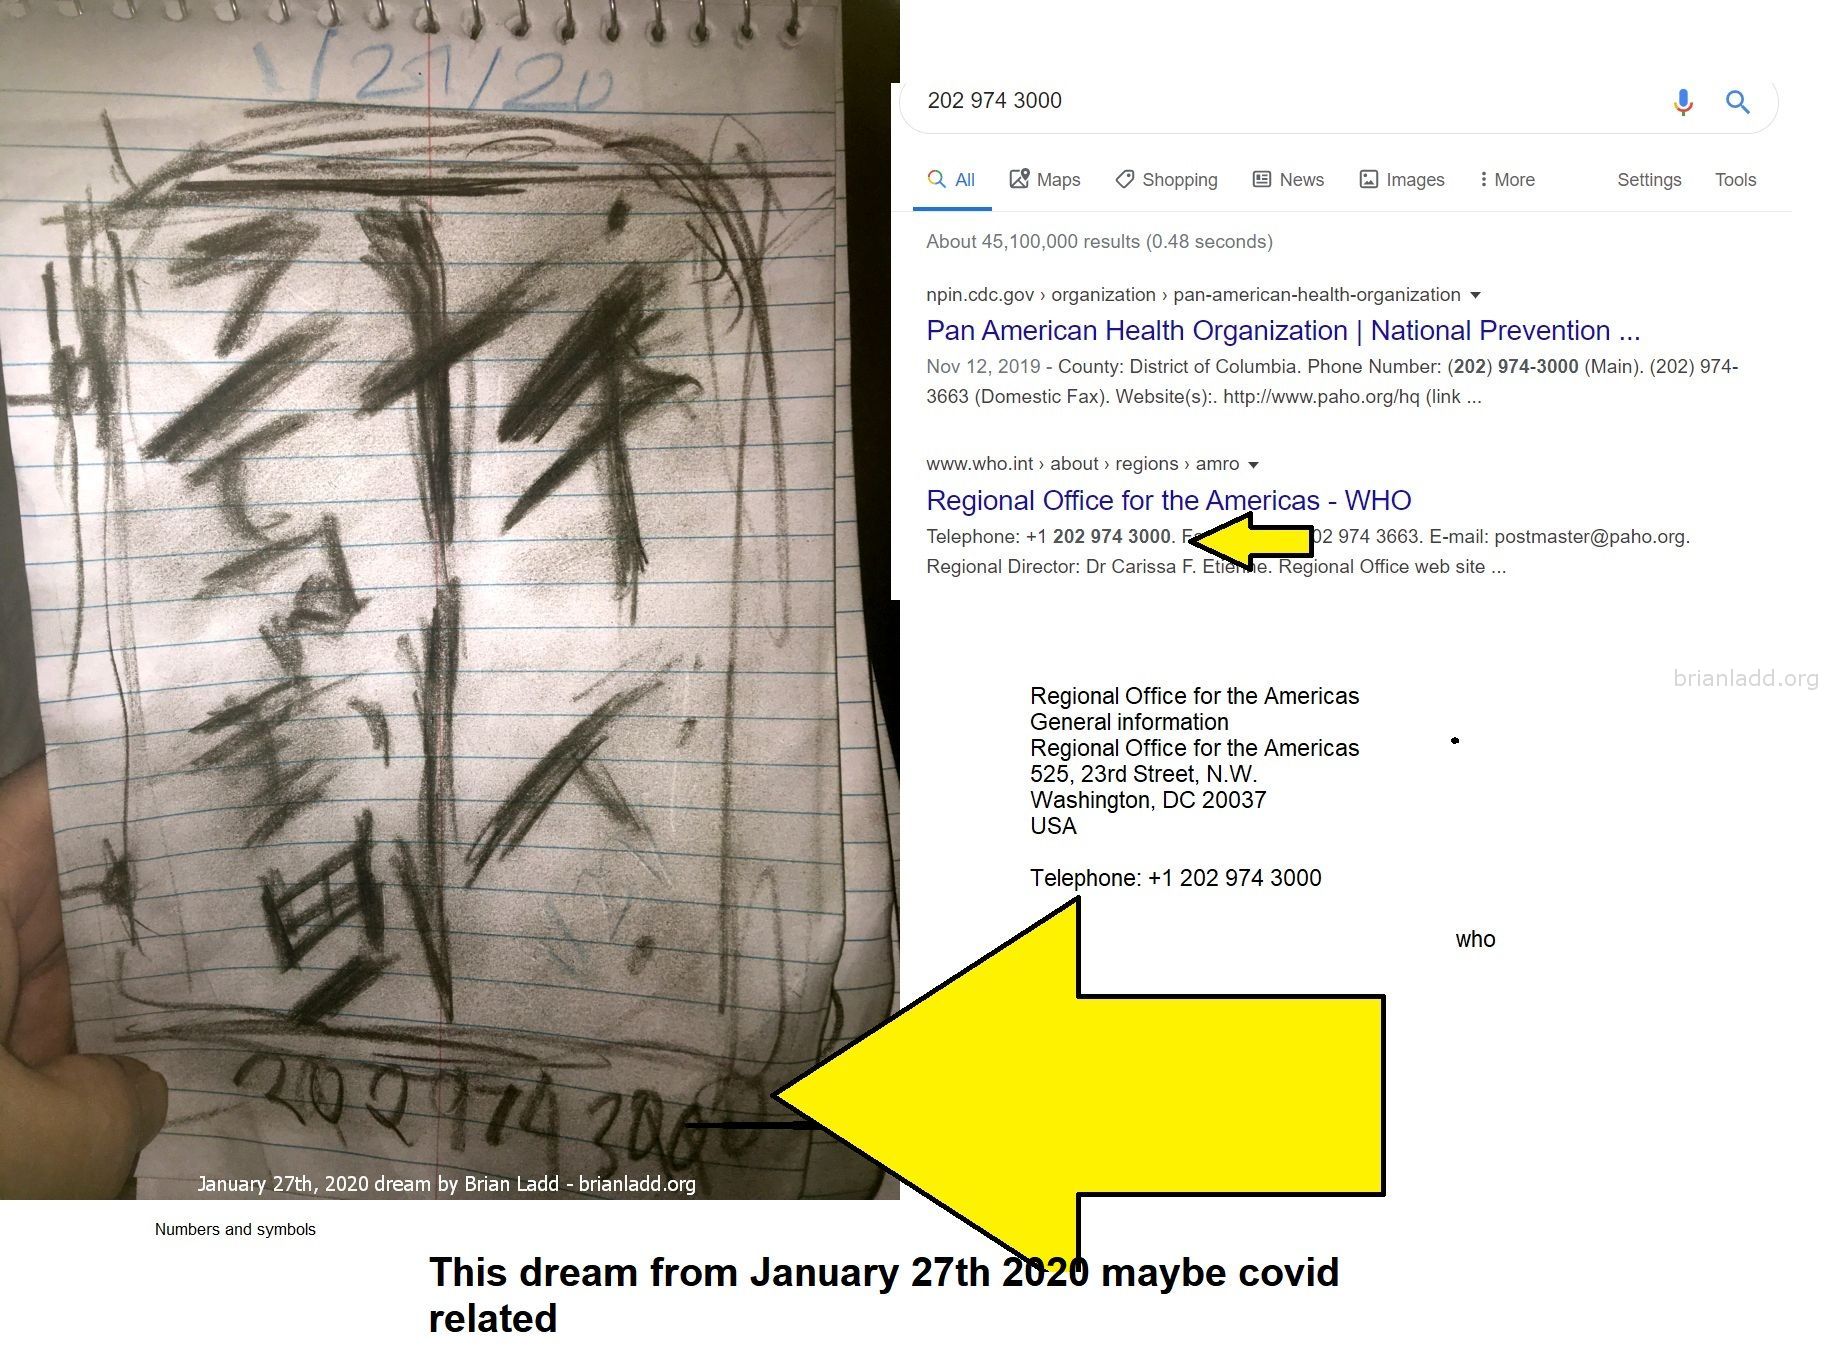 This Dream From January 27Th 2019 Maybe Covid Related 202 974 3000 Who Virus Numbers And Symbols 12641 27 January 2020 3...
This Dream From January 27th 2019 Maybe Covid Related - Says Numbers And Symbols And The Number Is The Who
